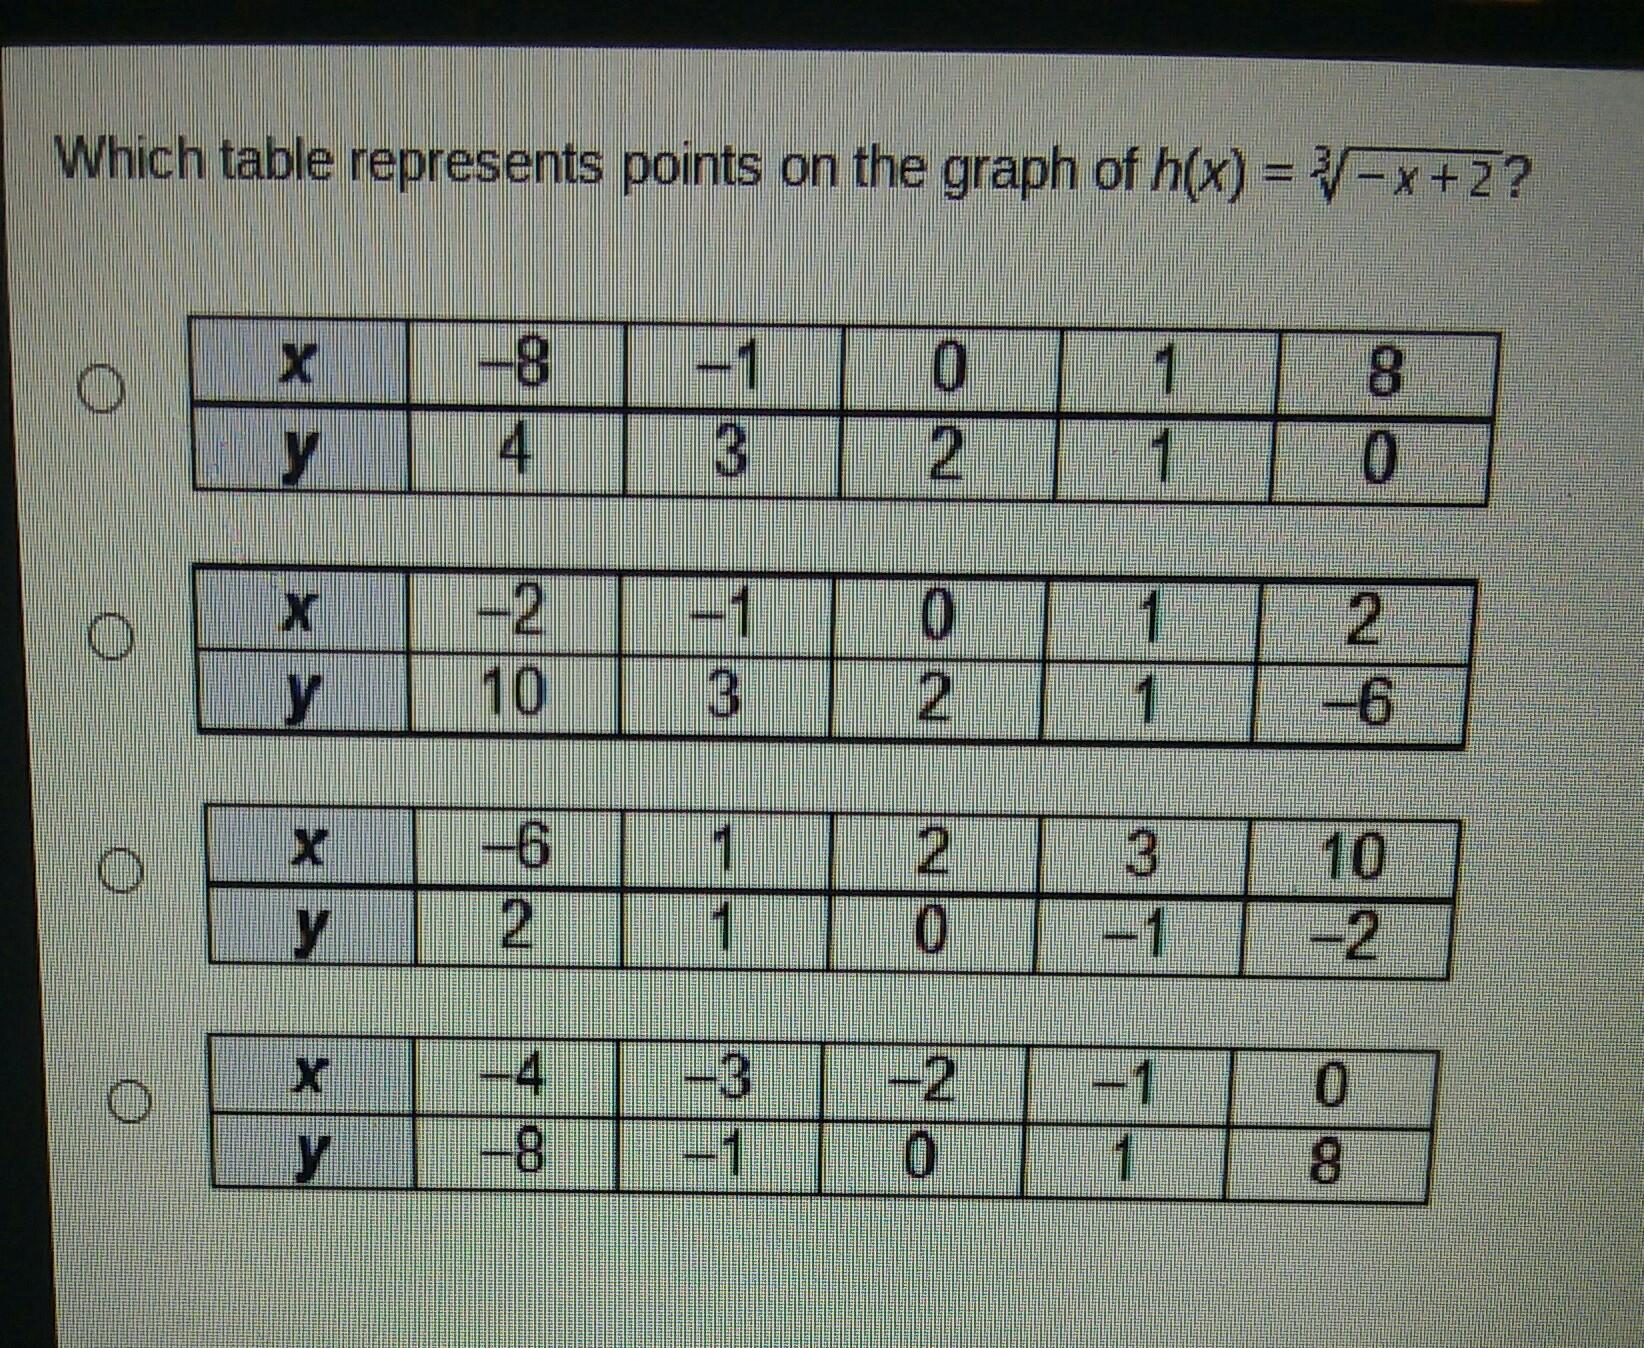 Which Table Represents Points On The Graph Of H (x) = 3 Root -x+2